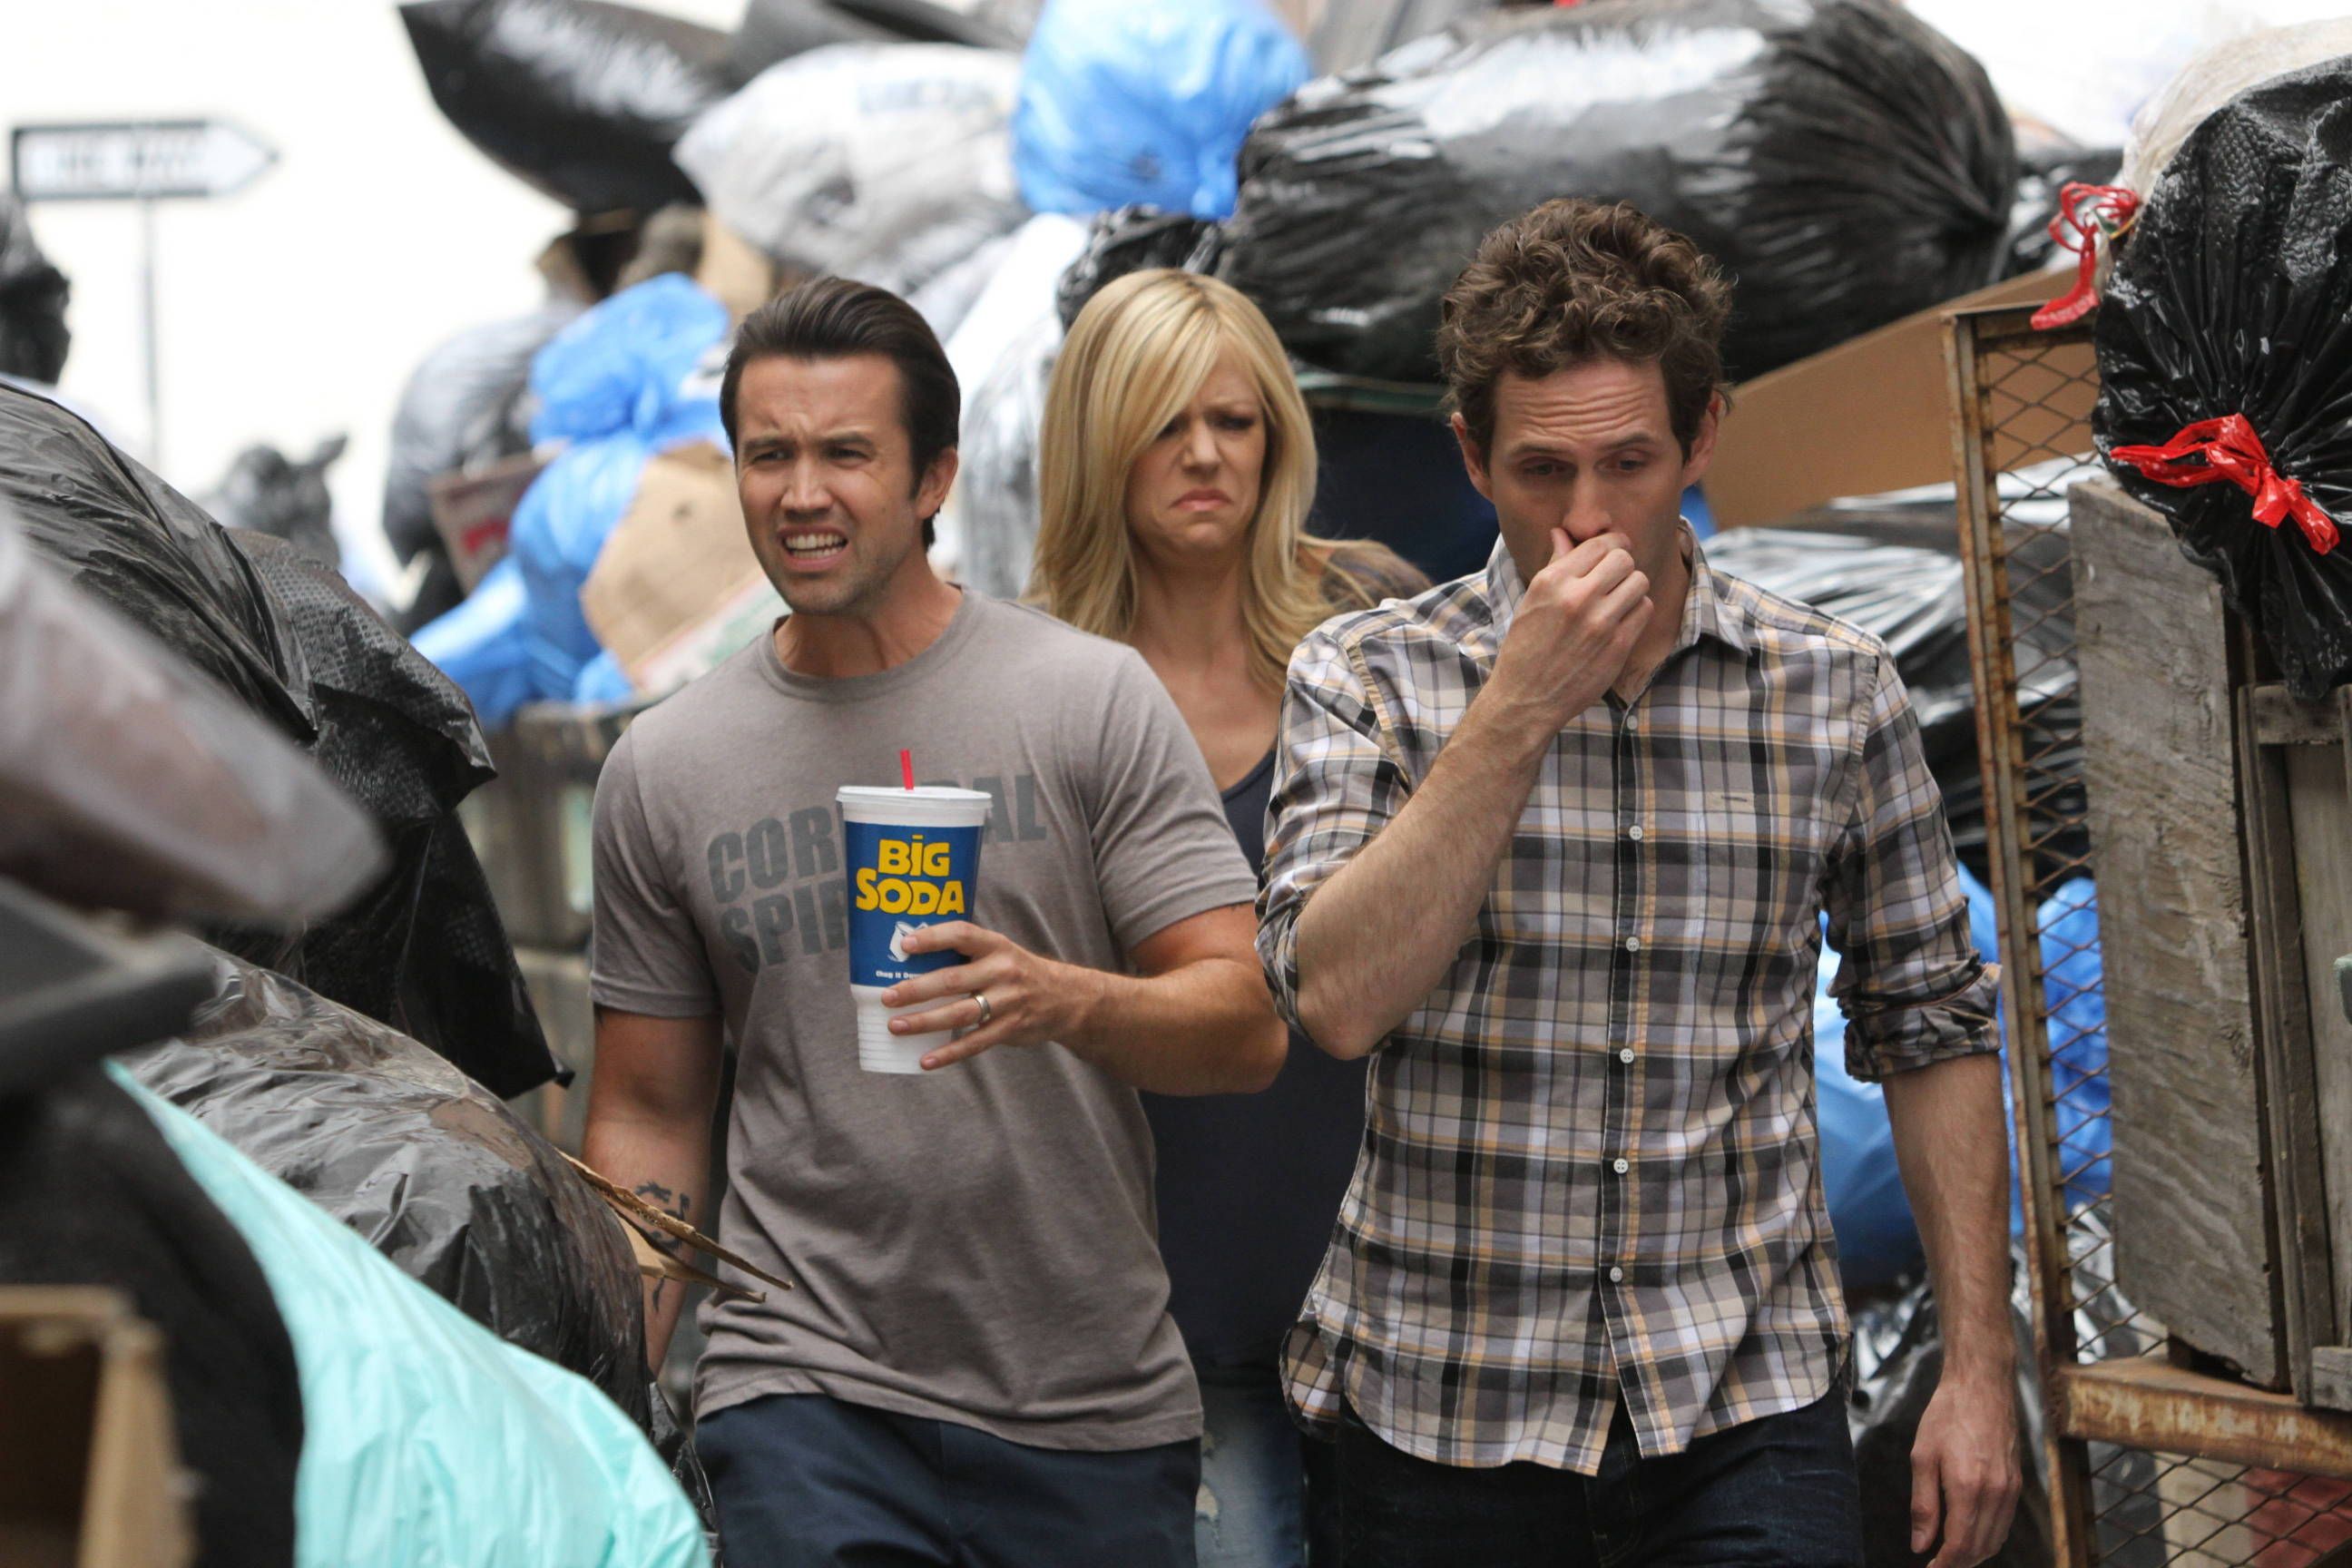 It's Always Sunny in Philadelphia: The Gang Recycles Their Trash Photo 5